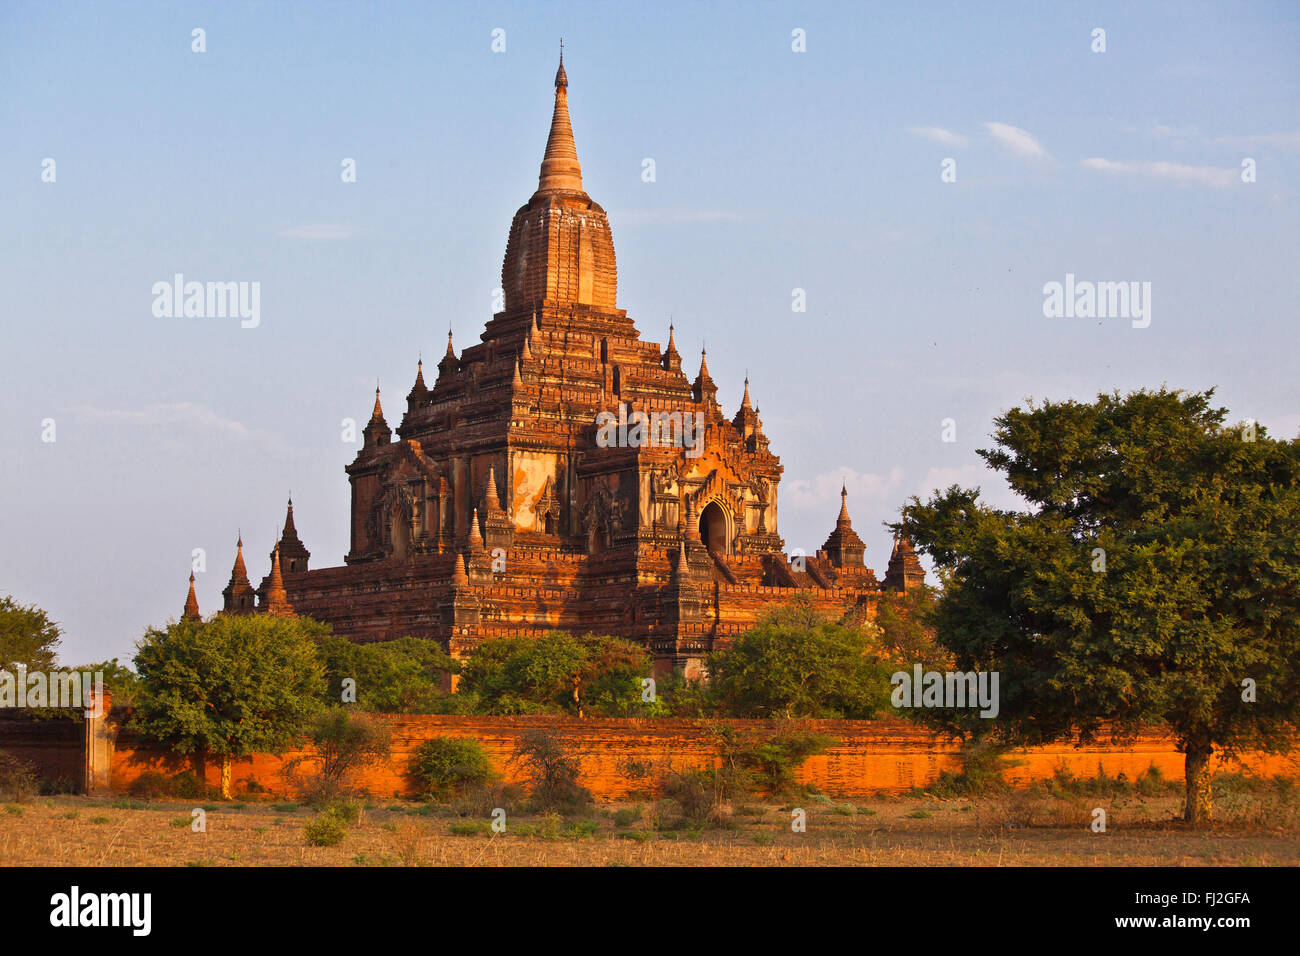 SULAMANI TEMPLE was built in 1183 by Narapatisithu - BAGAN, MYANMAR Stock Photo